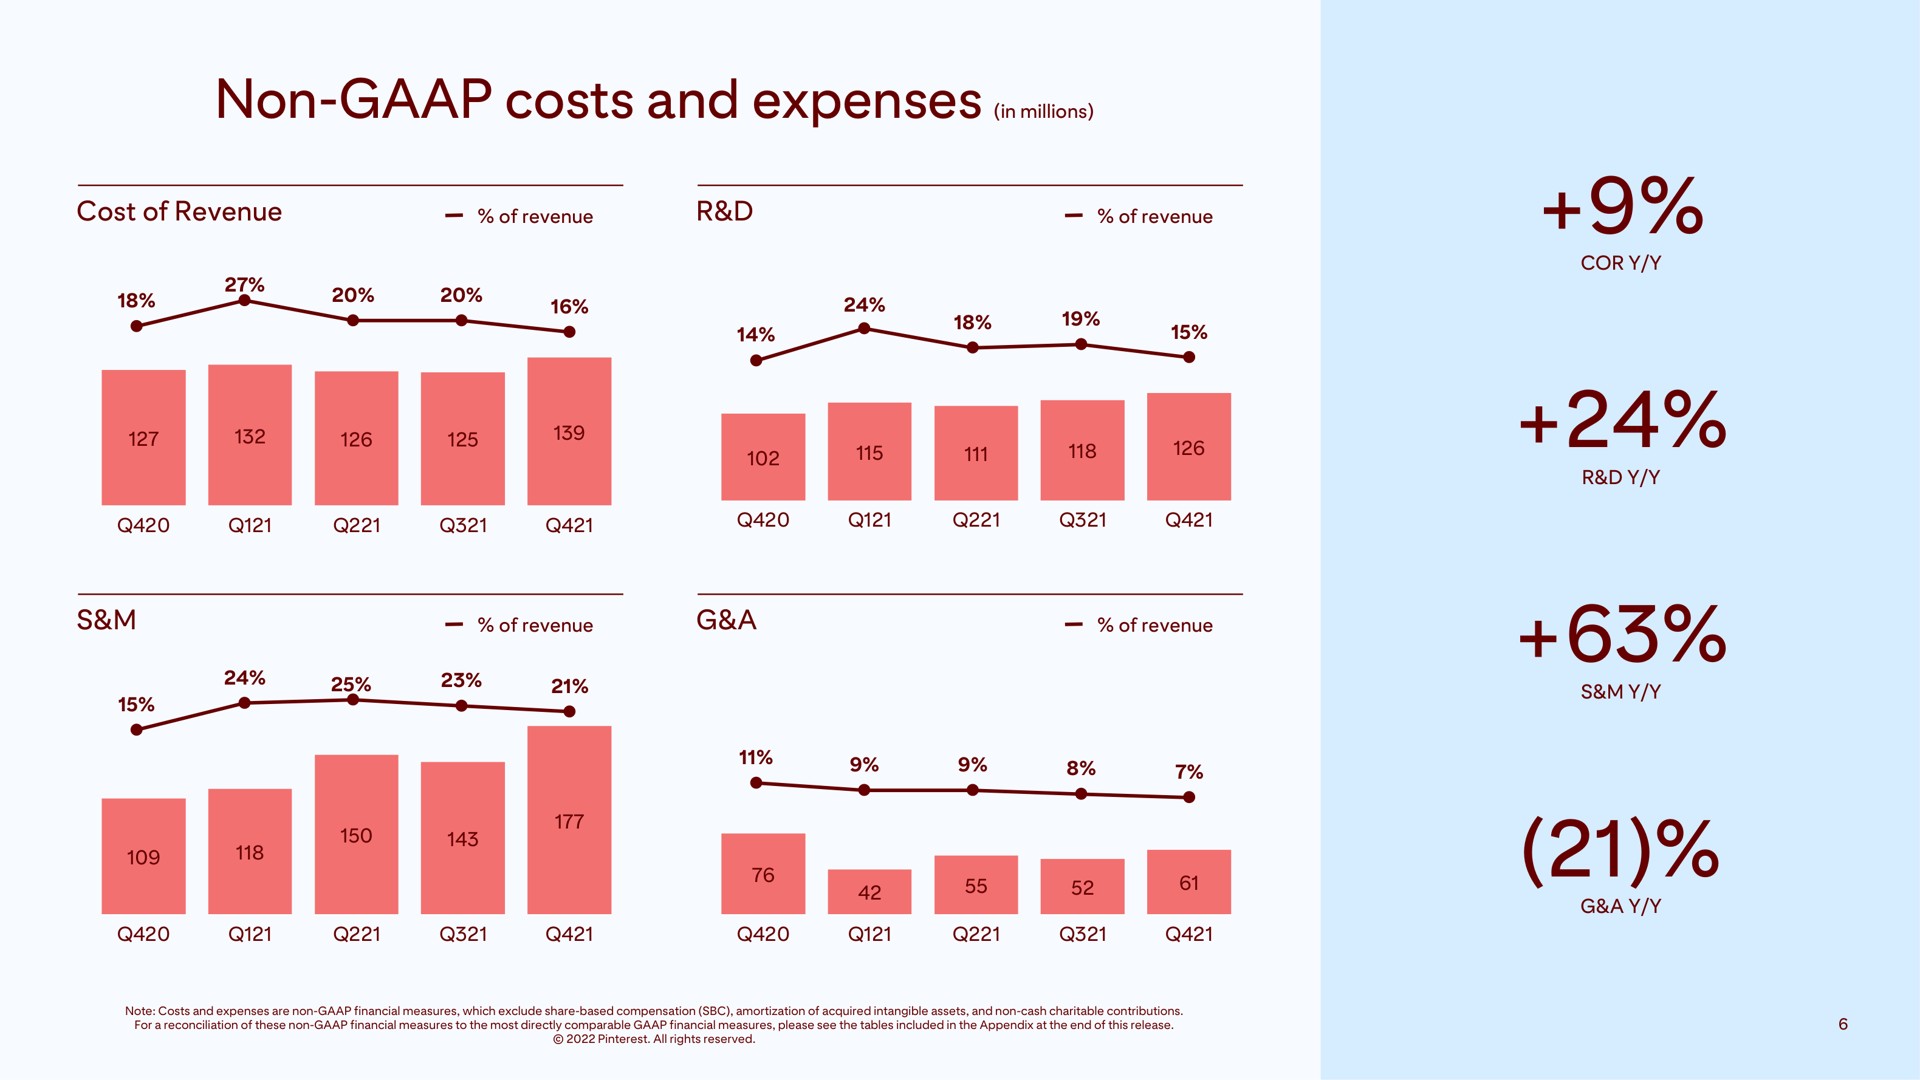 non costs and expenses in millions | Pinterest